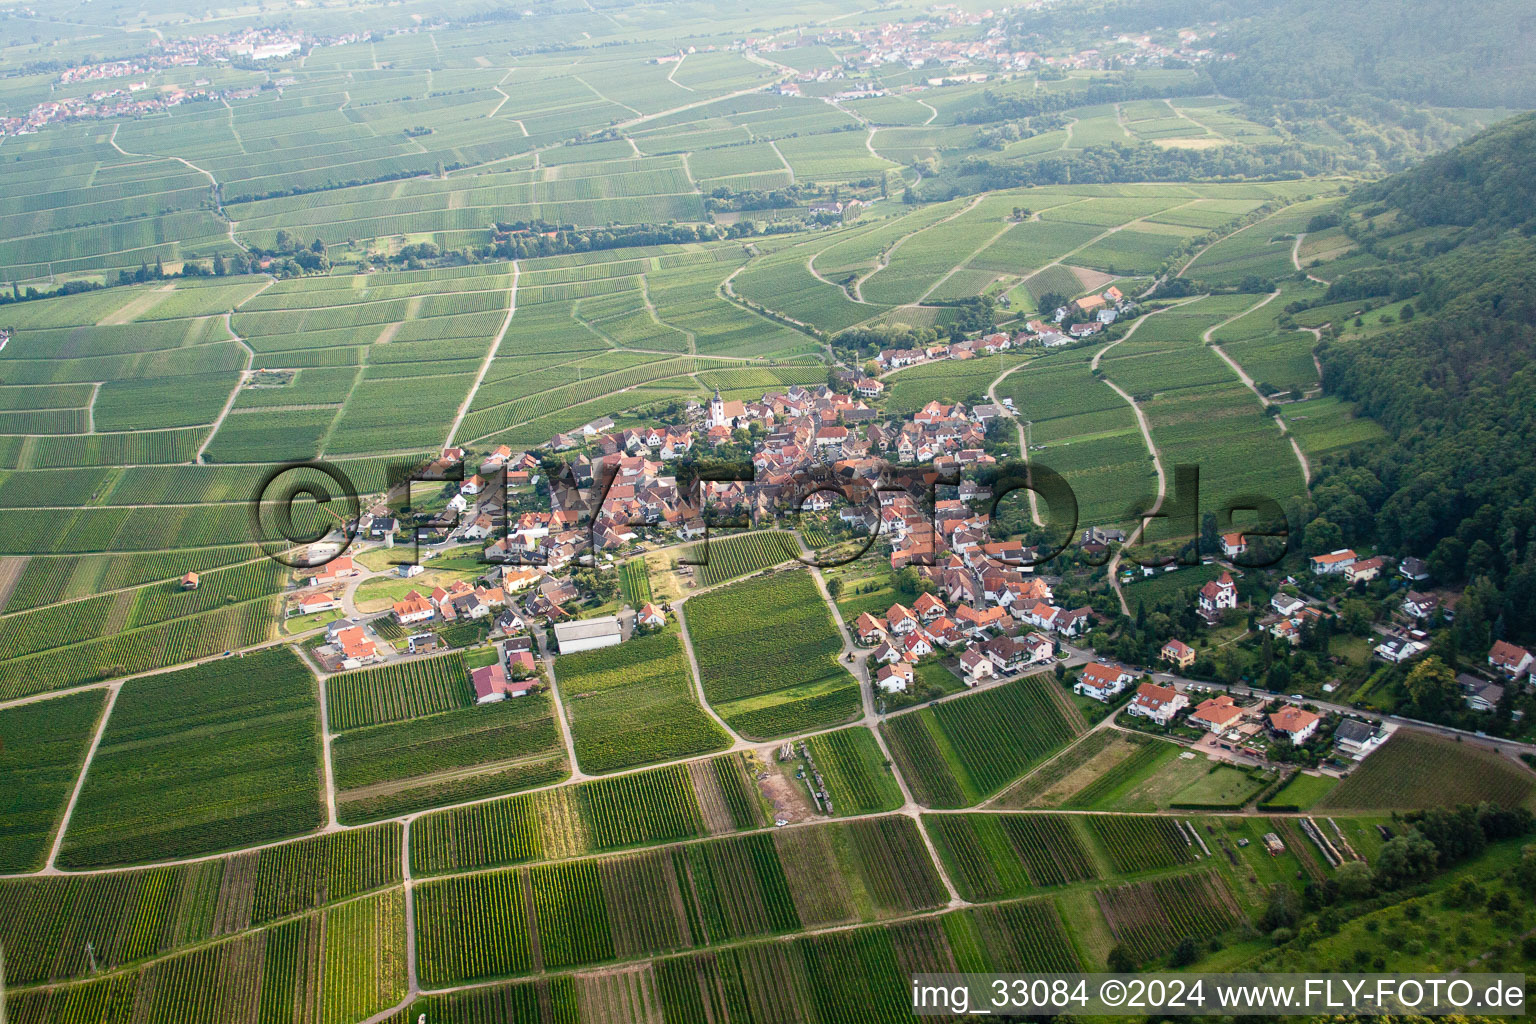 Aerial view of From the north in Weyher in der Pfalz in the state Rhineland-Palatinate, Germany